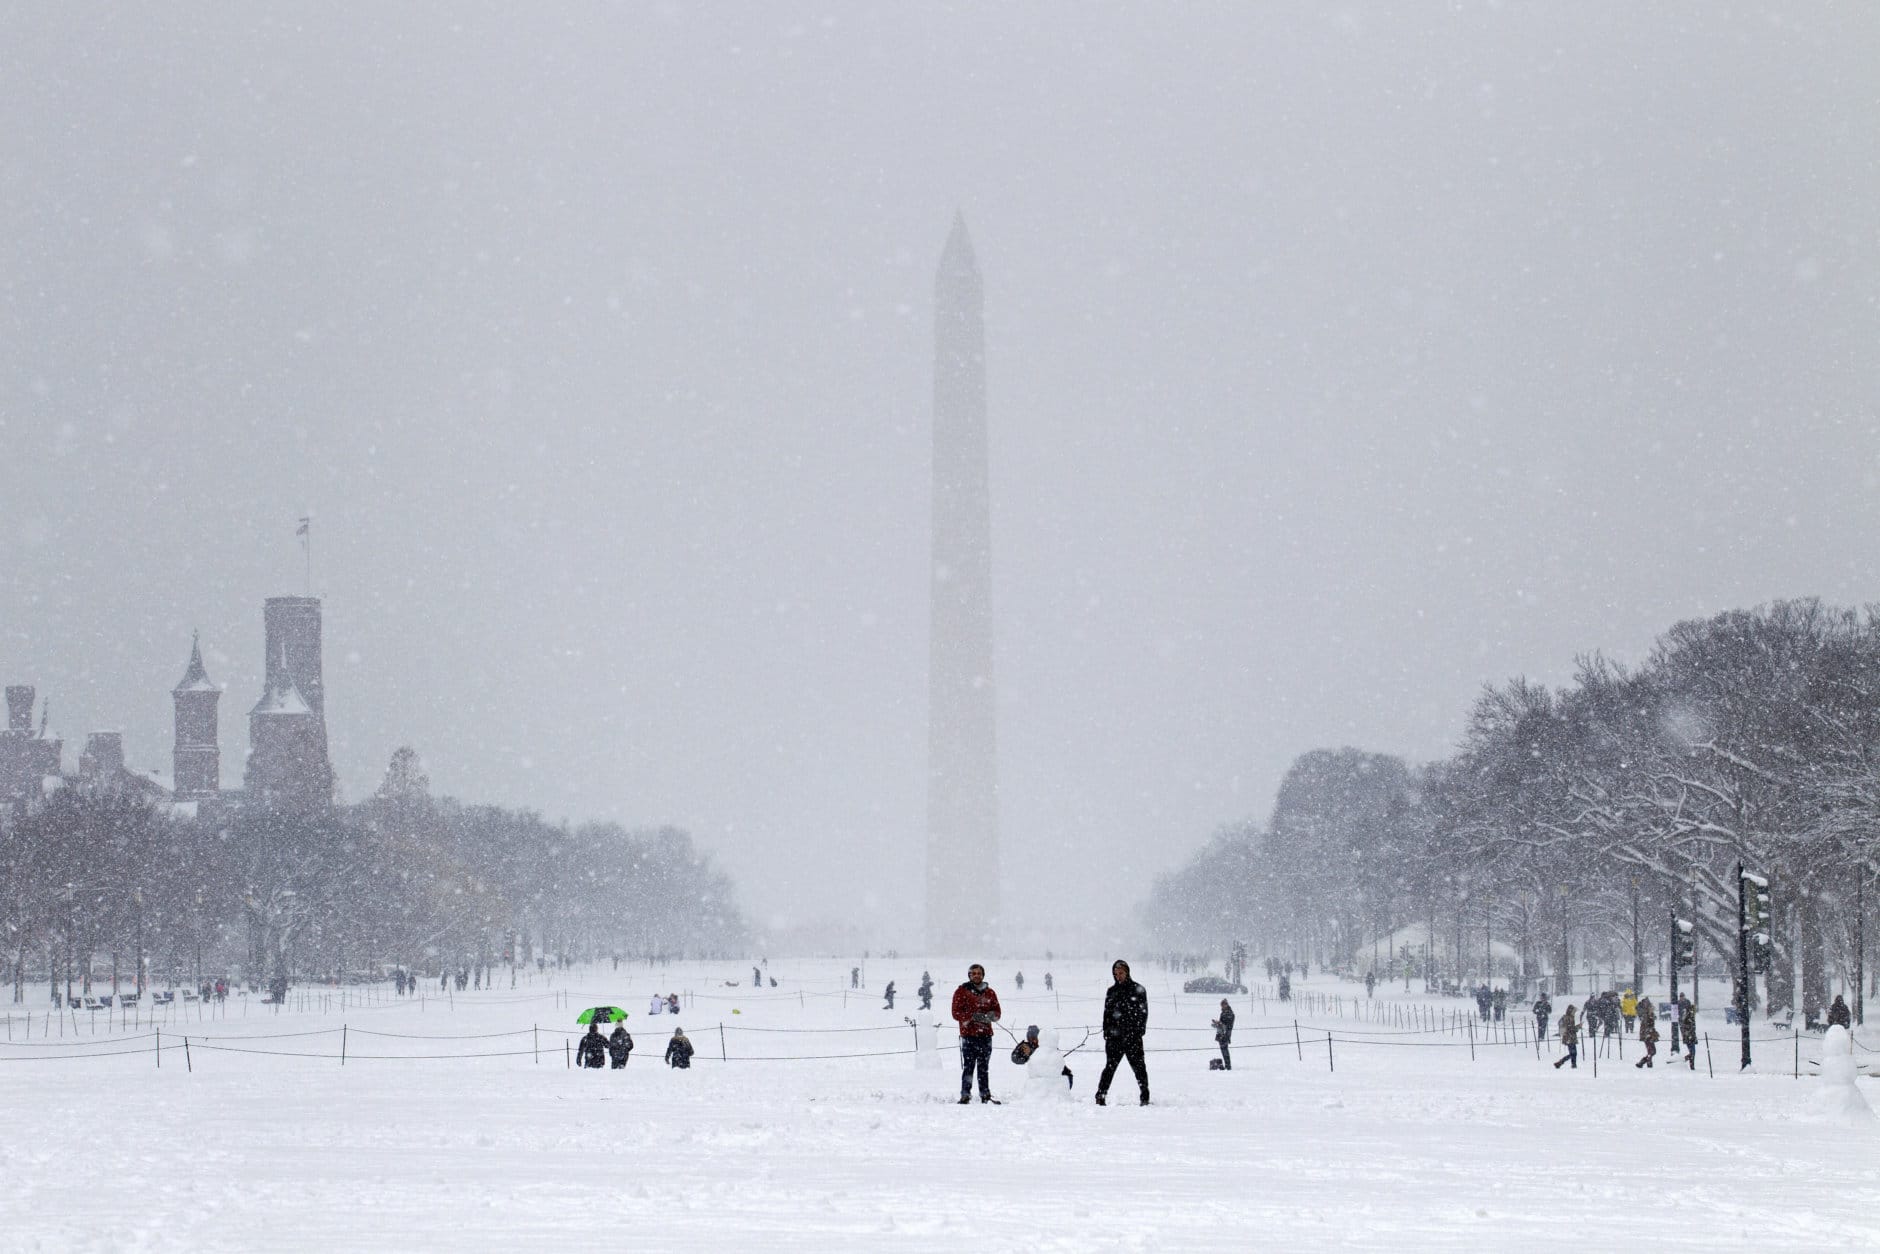 People play with snow at the National Mall during a snowstorm, as a partial government shutdown stretches into its third week at Capitol Hill in Washington Sunday, Jan. 13, 2019. With the standoff over paying for his long-promised border wall dragging on, the president's Oval Office address and visit to the Texas border over the past week failed to break the logjam and left aides and allies fearful that the president has misjudged Democratic resolve and is running out of negotiating options. (AP Photo/Jose Luis Magana)